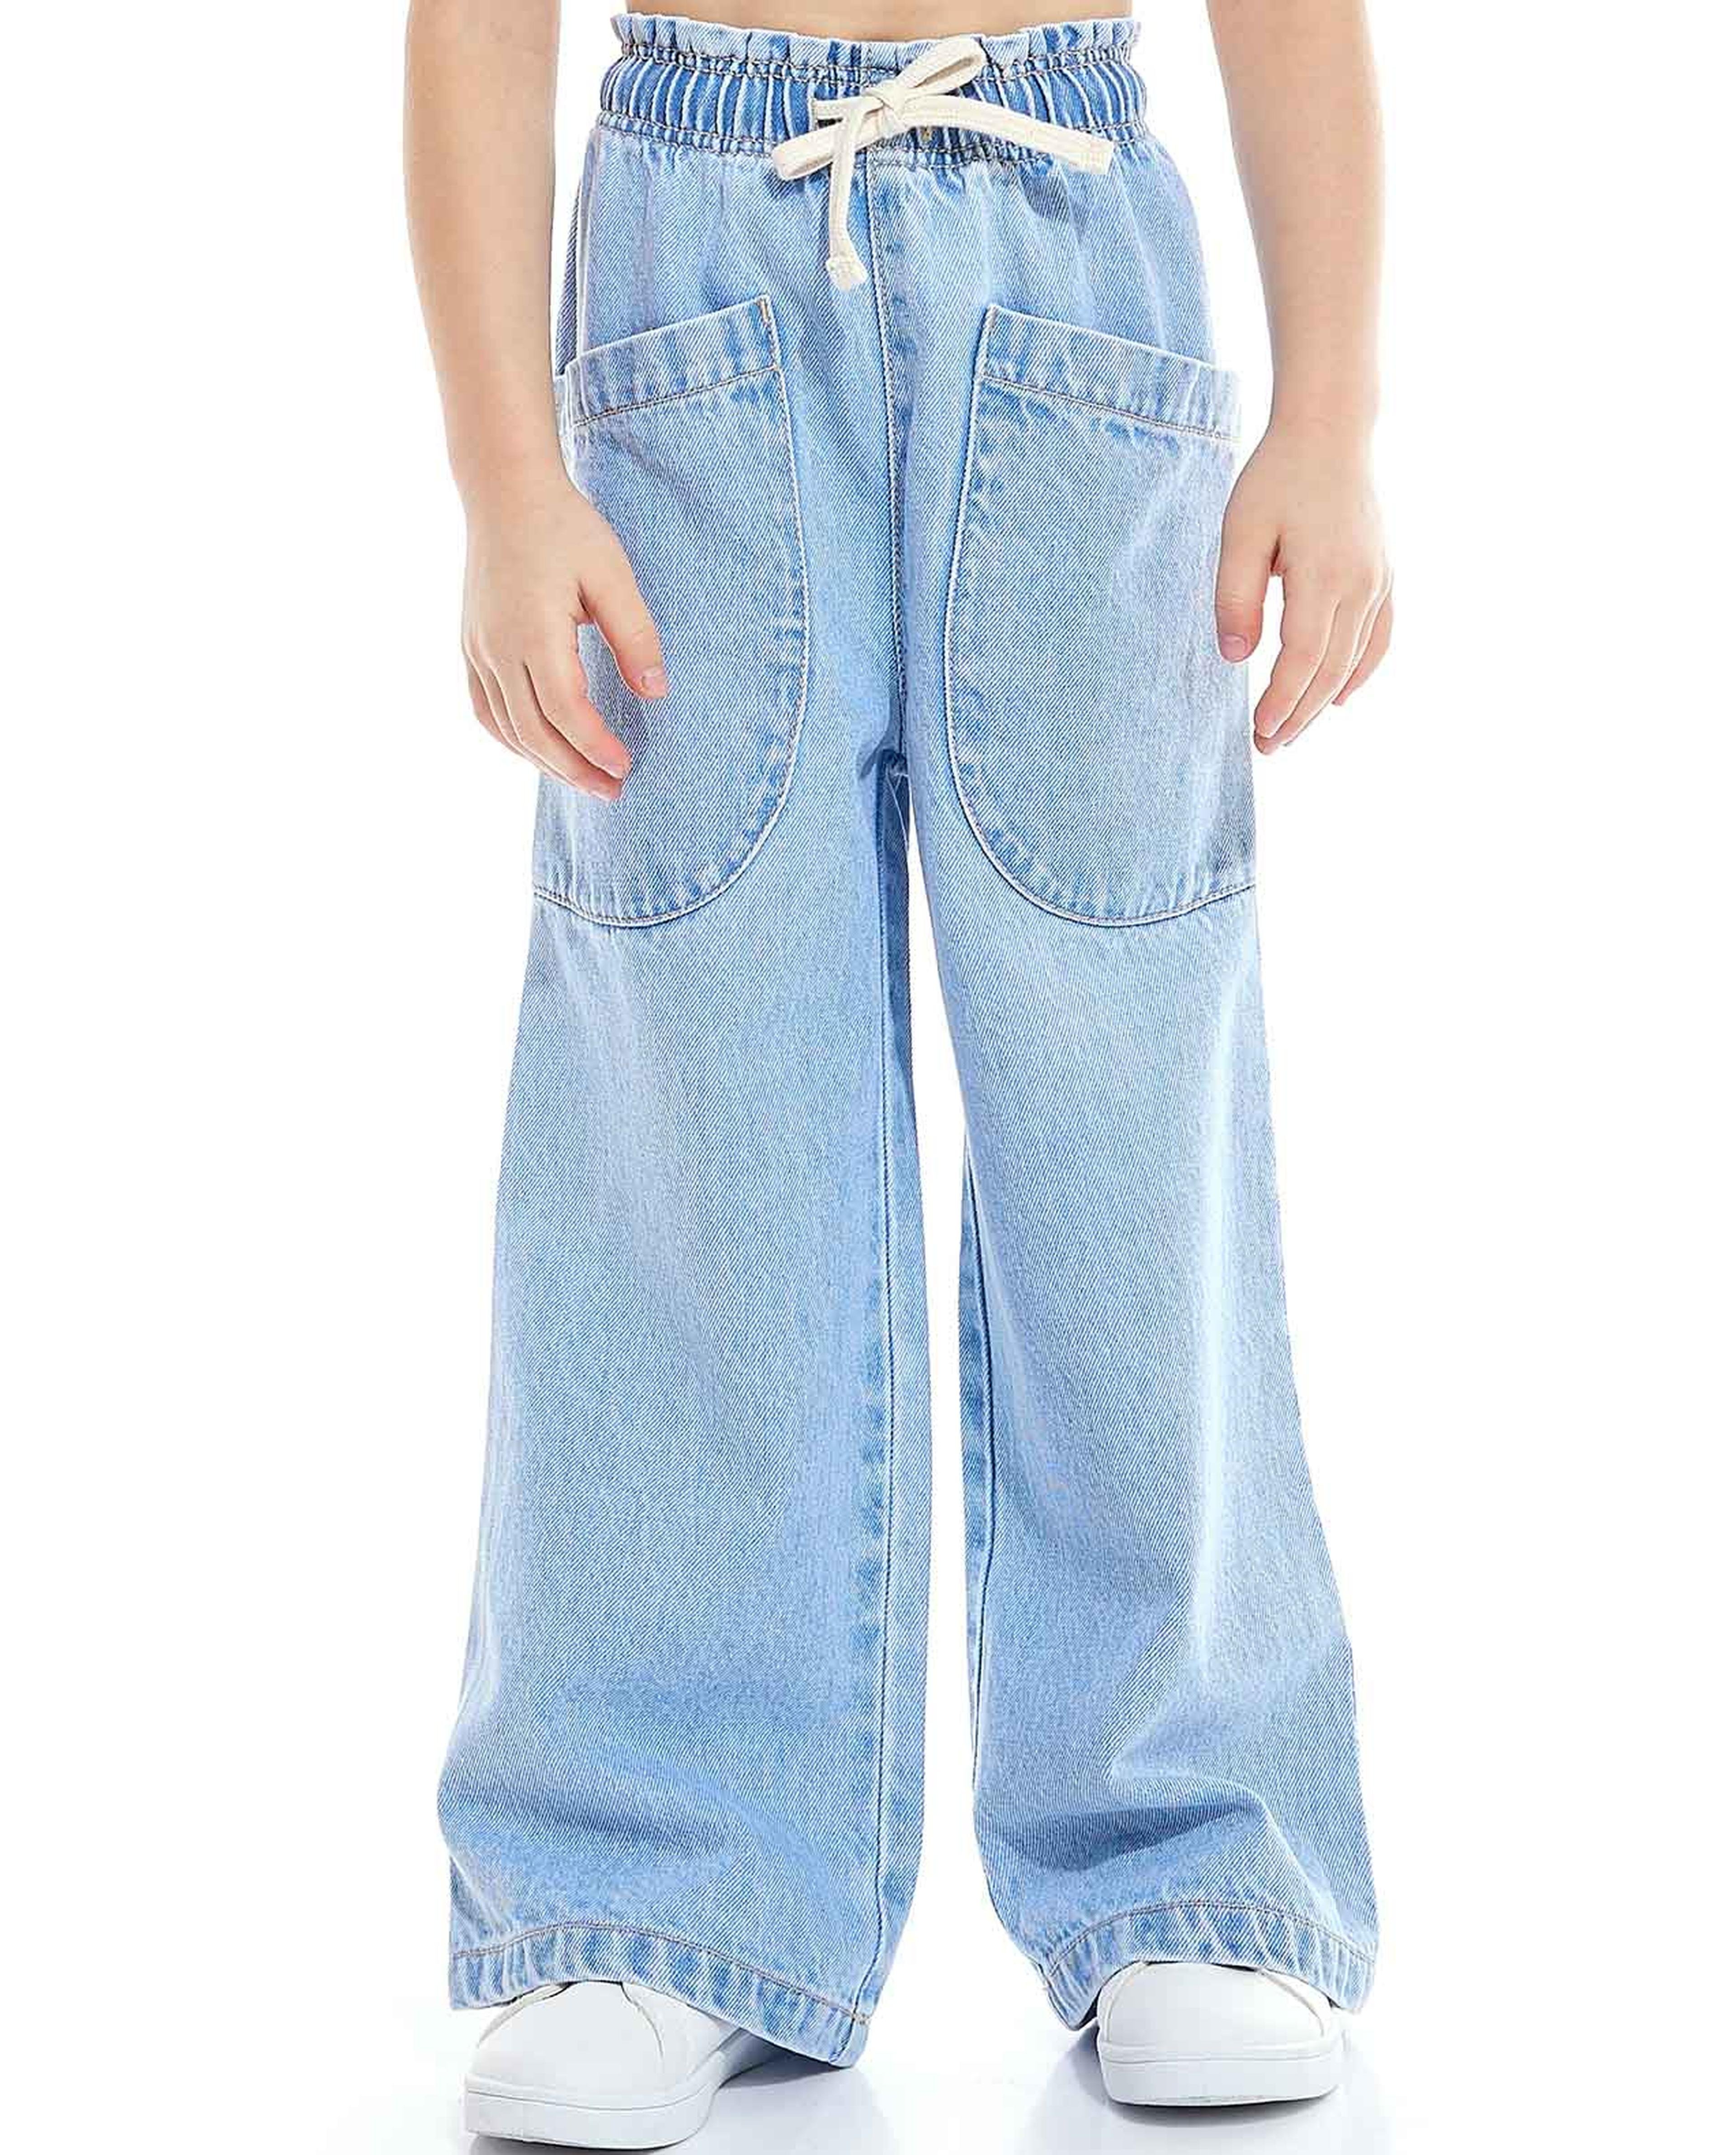 Faded Wide Leg Jeans with Drawstring Waist